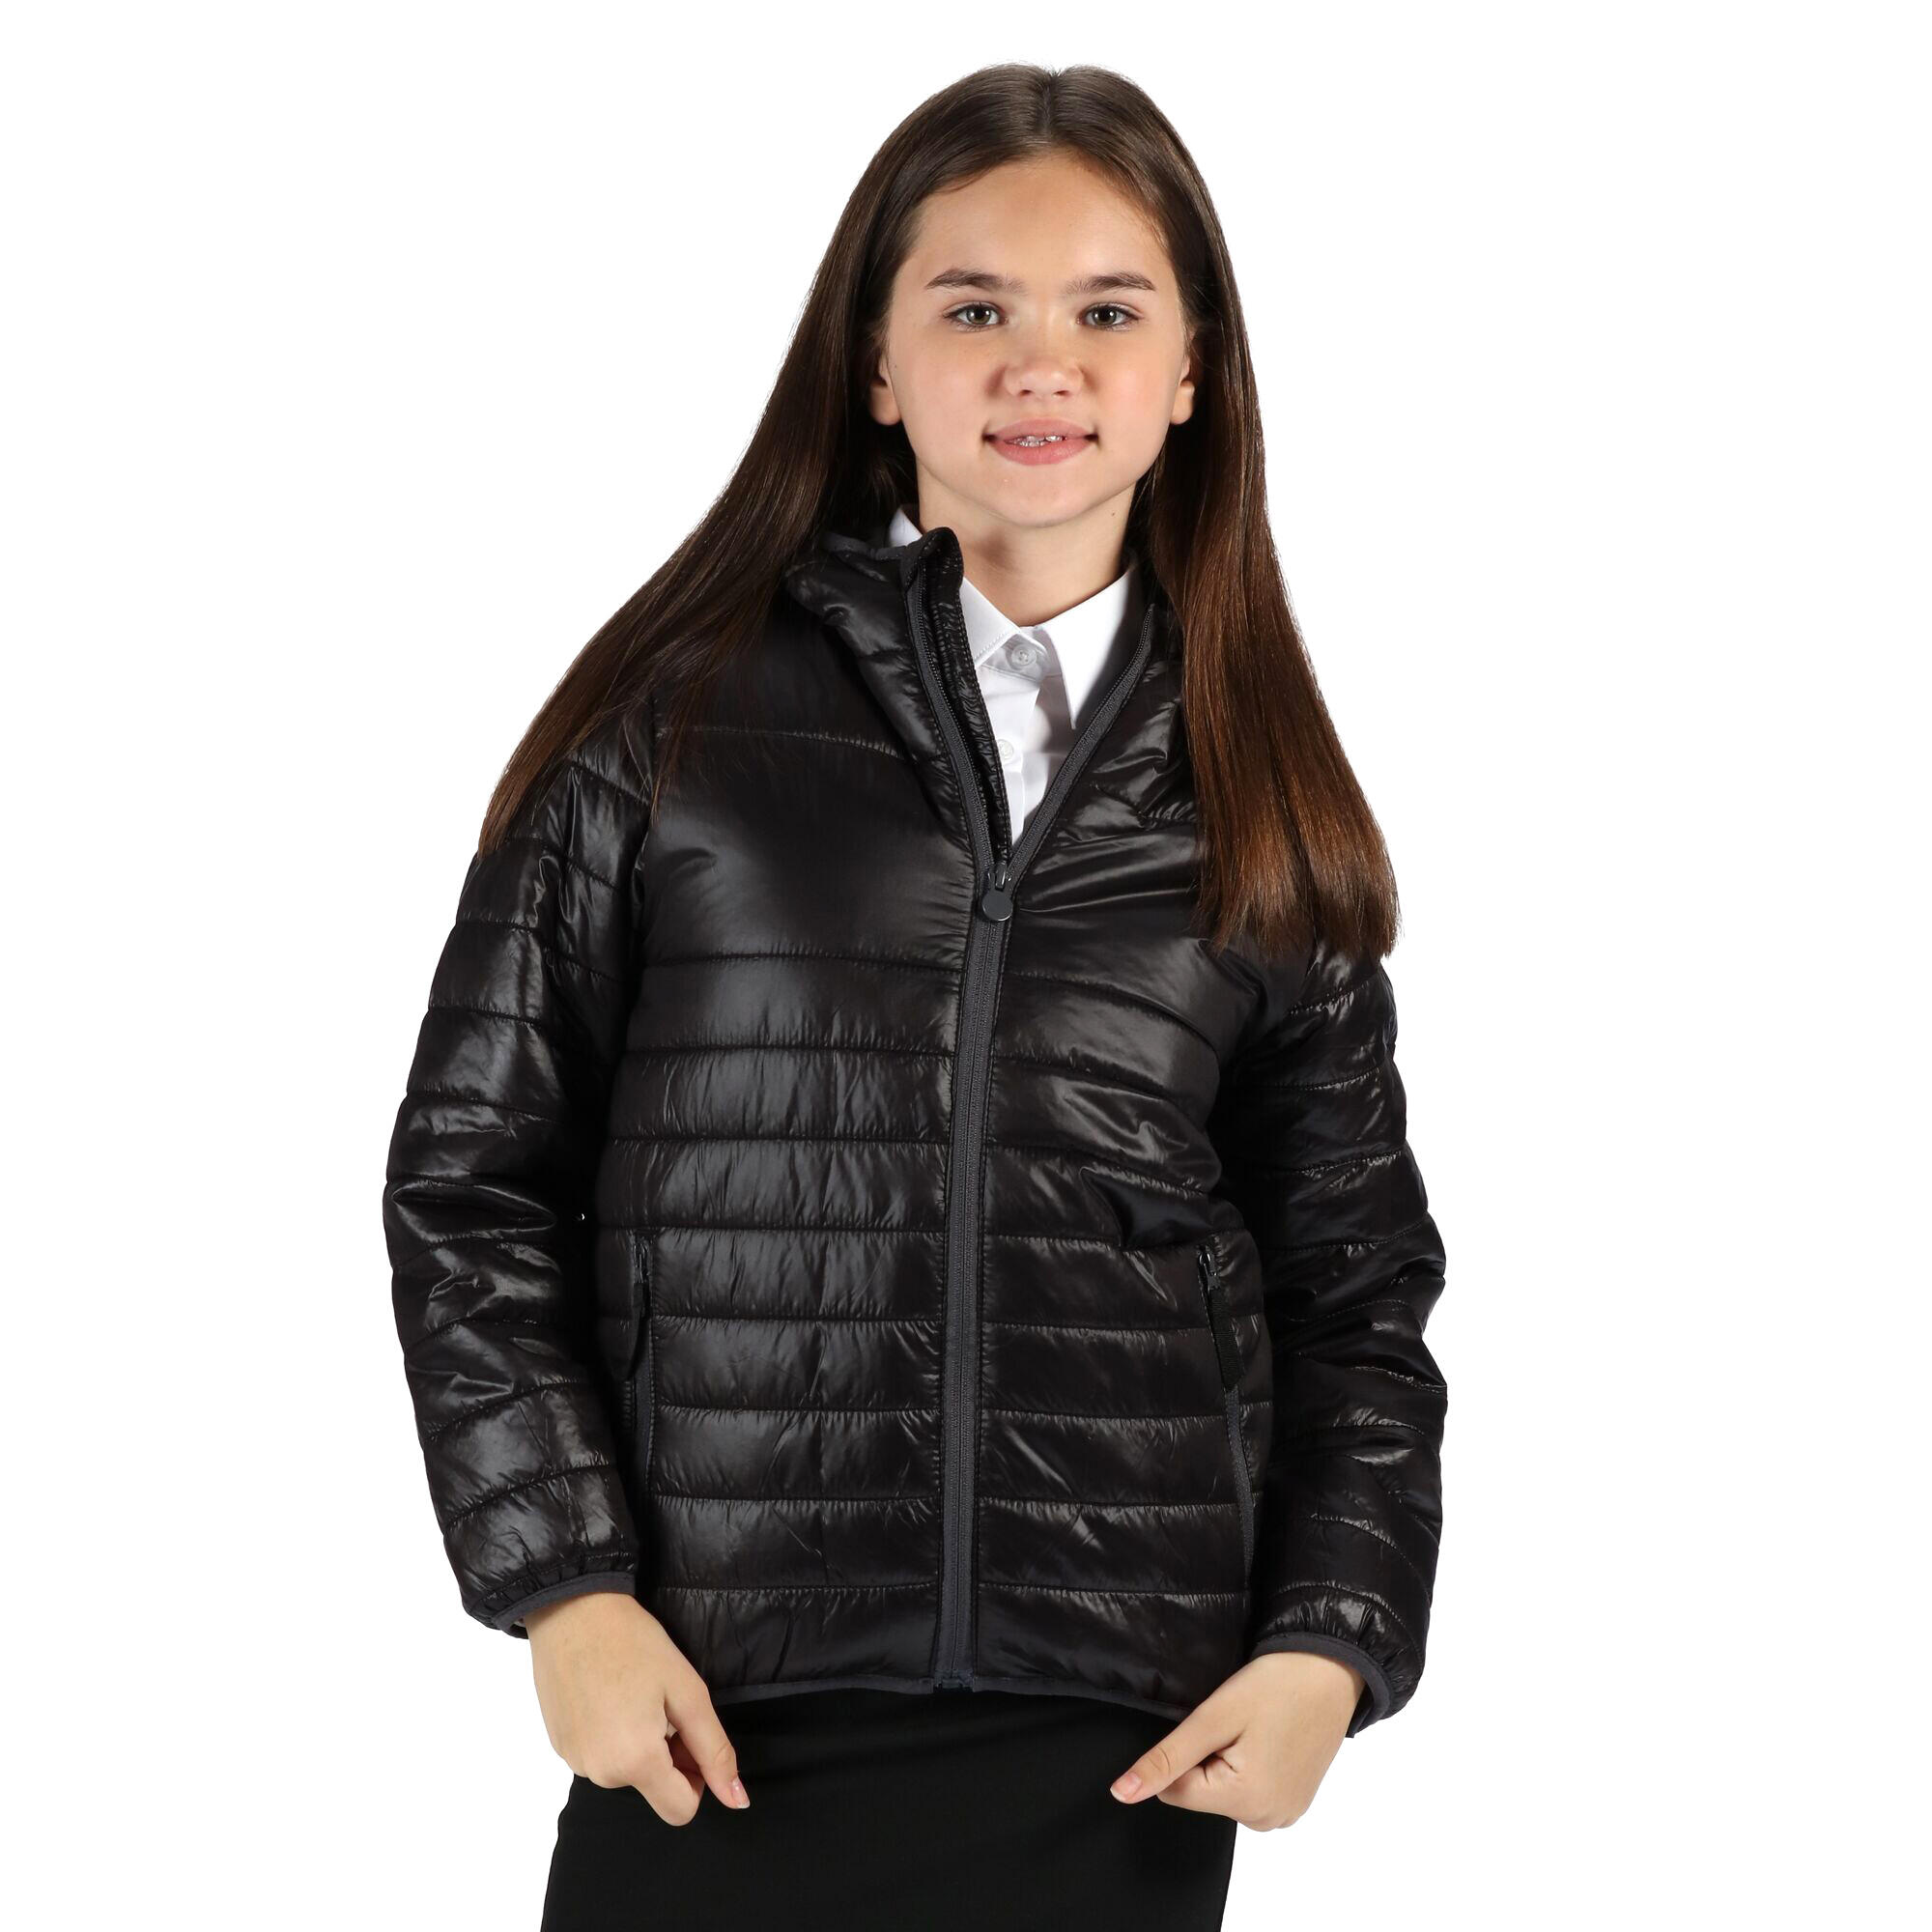 Childrens/Kids Stormforce Thermal Insulated Jacket (Black) 1/4